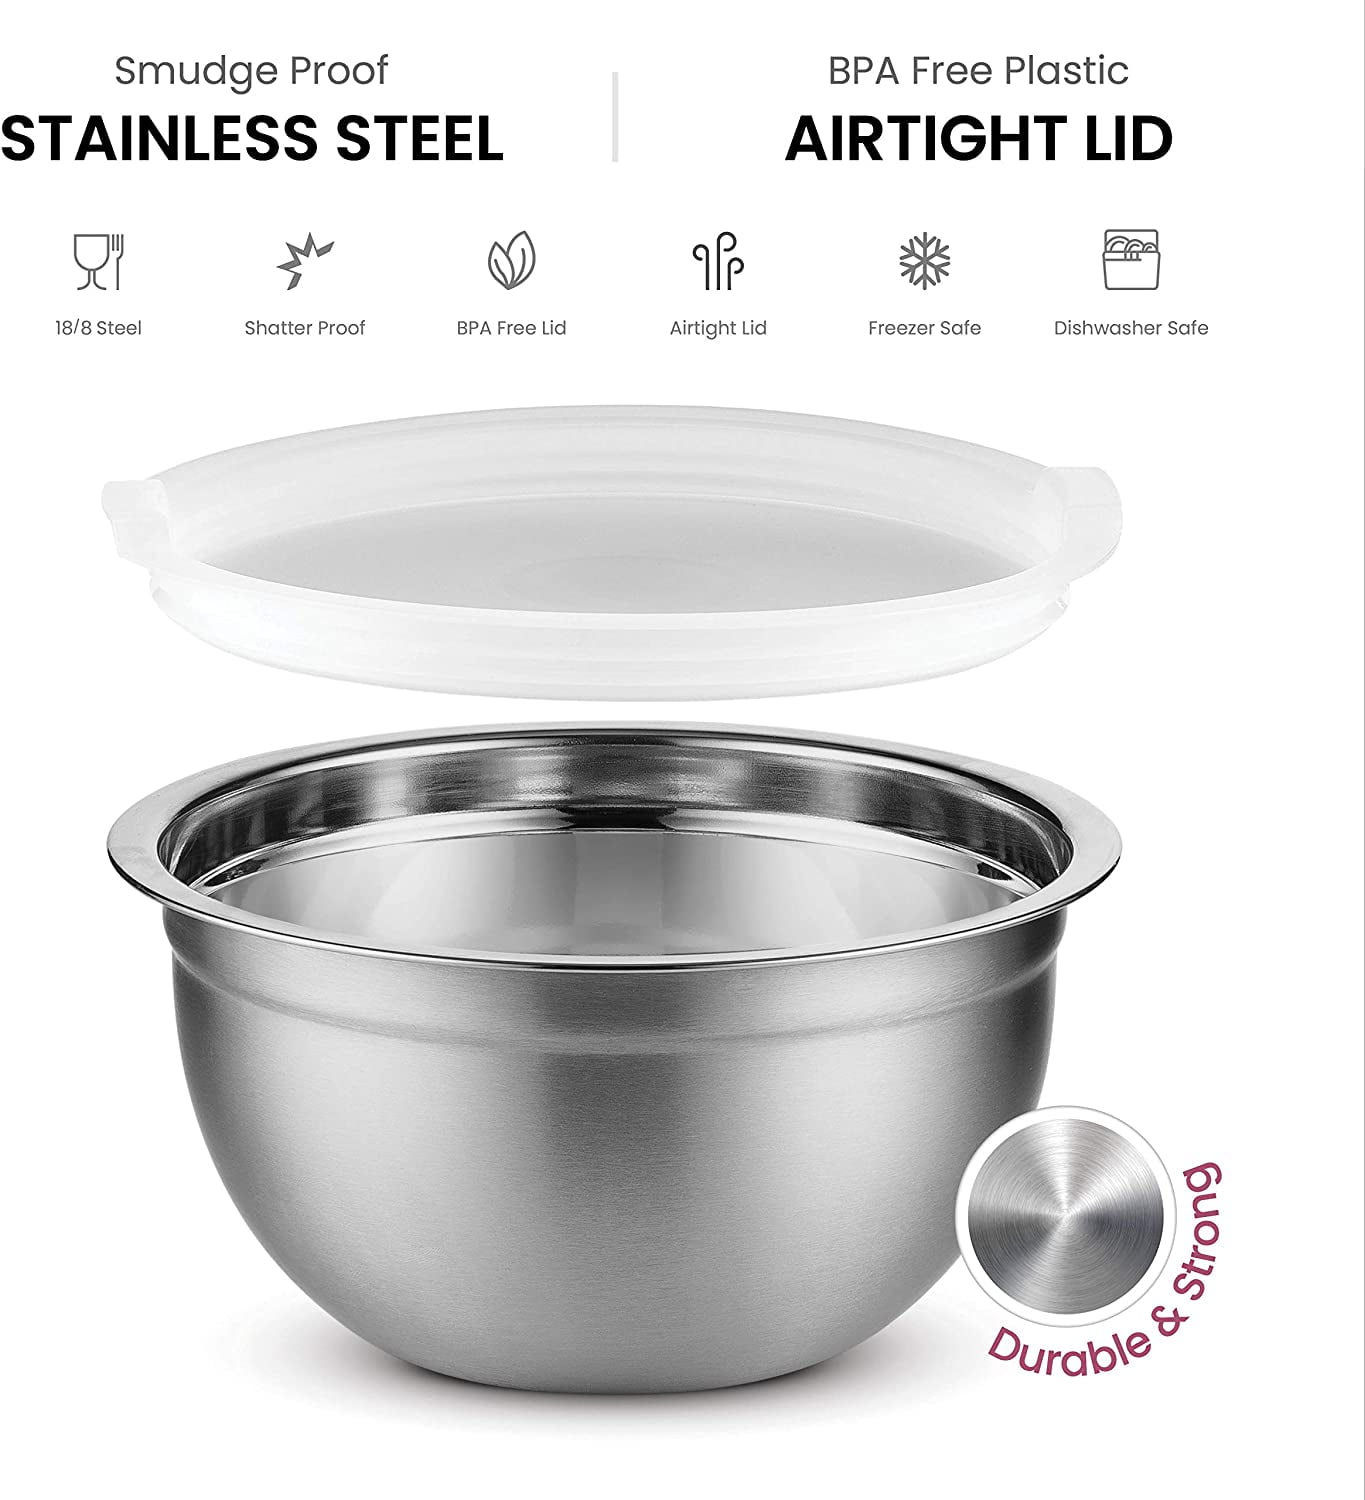 Nesting Storage Bowls Polished Mirror Finish for Healthy Meal Mixing Cooking Supplies 1.5-2.6-3.4-4.2-7.1QT Stainless Steel Mixing Bowls with Lids by SONGNO Set of 5 